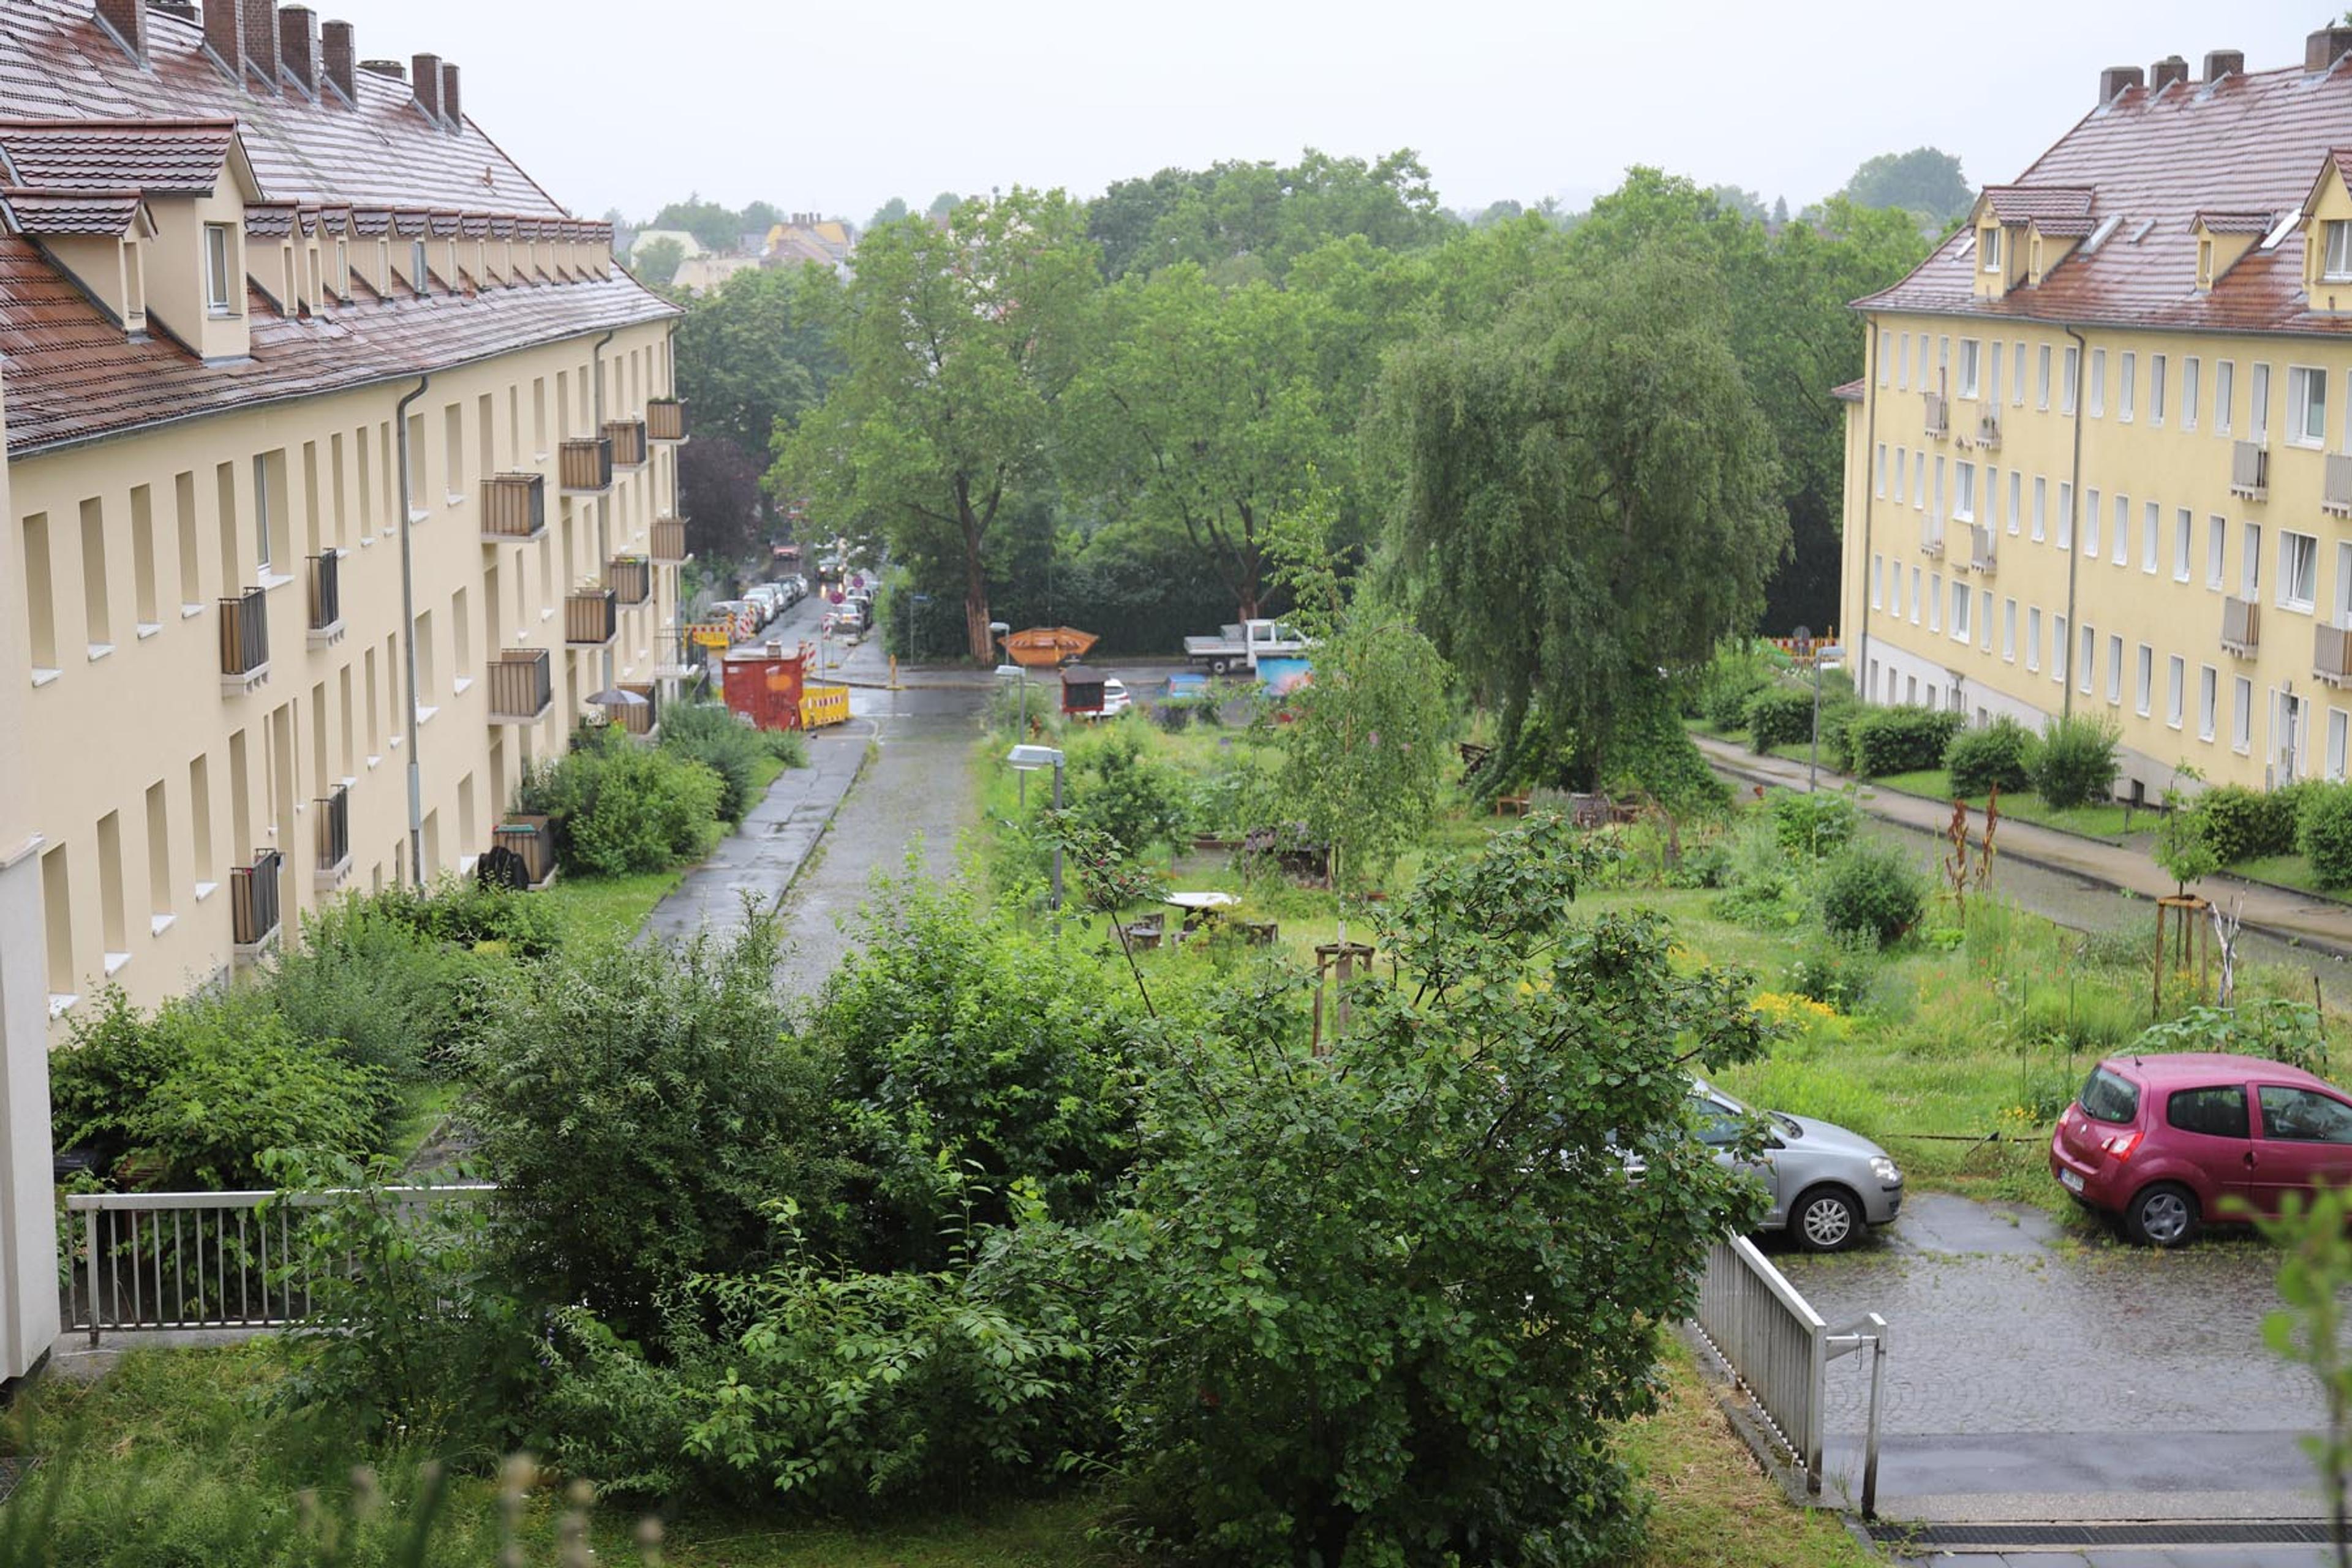 A photo showing a green area with trees between two multi-storey residential building